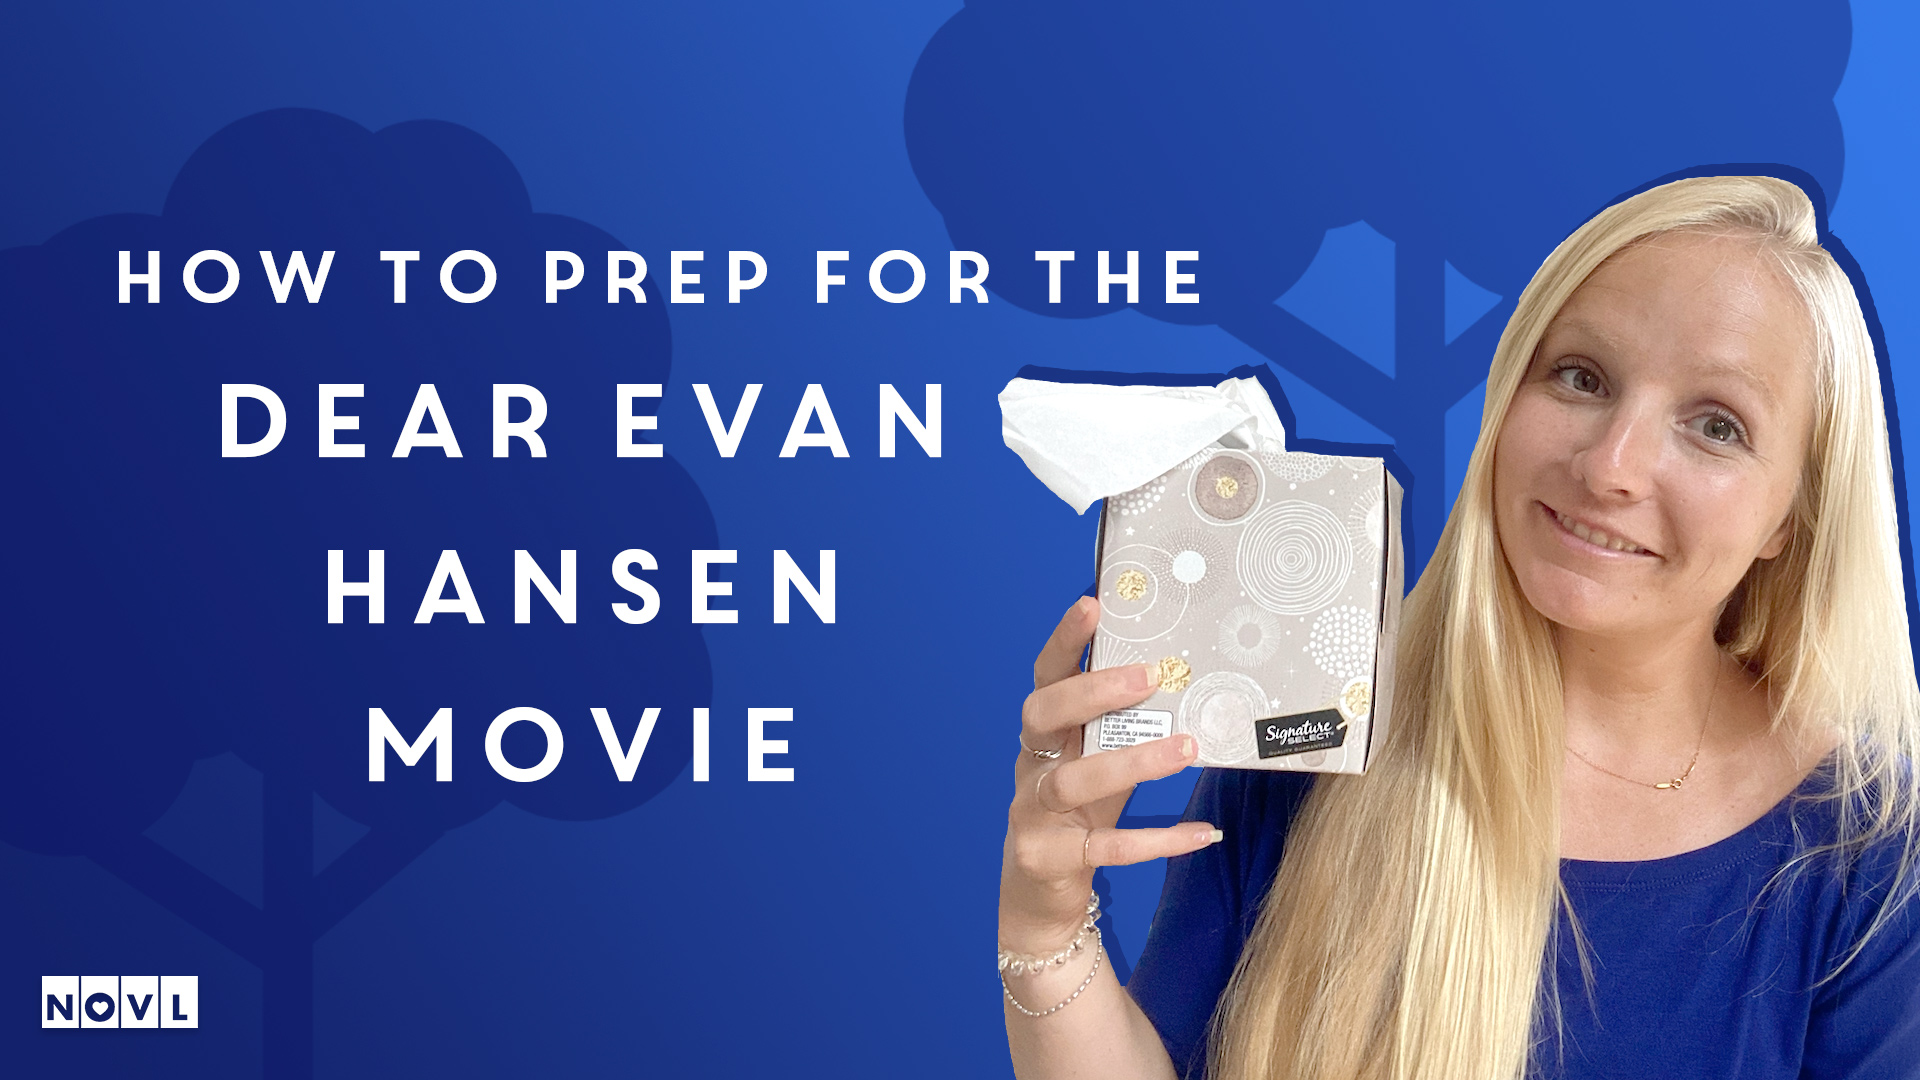 The NOVL Blog, Featured Image for Article: How to prep for the Dear Evan Hansen movie